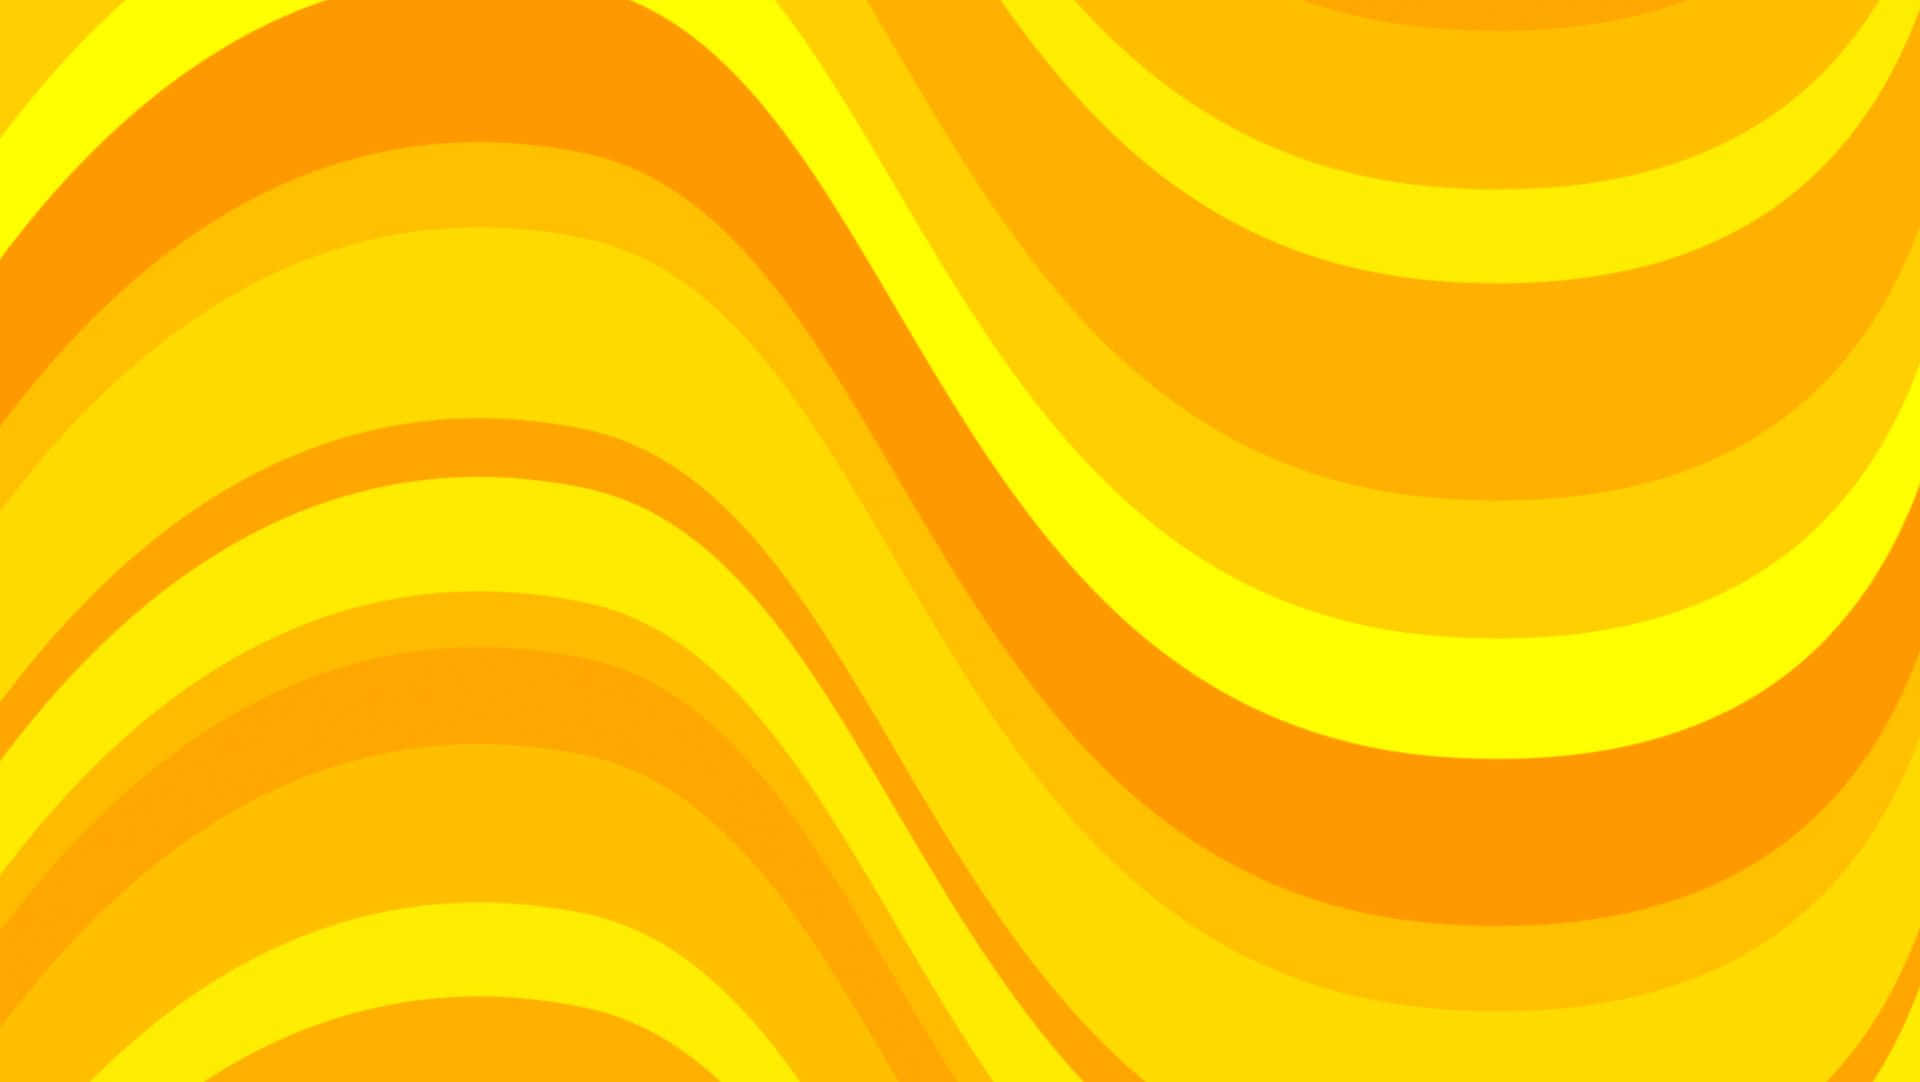 Vibrant Orange and Yellow Abstract Background